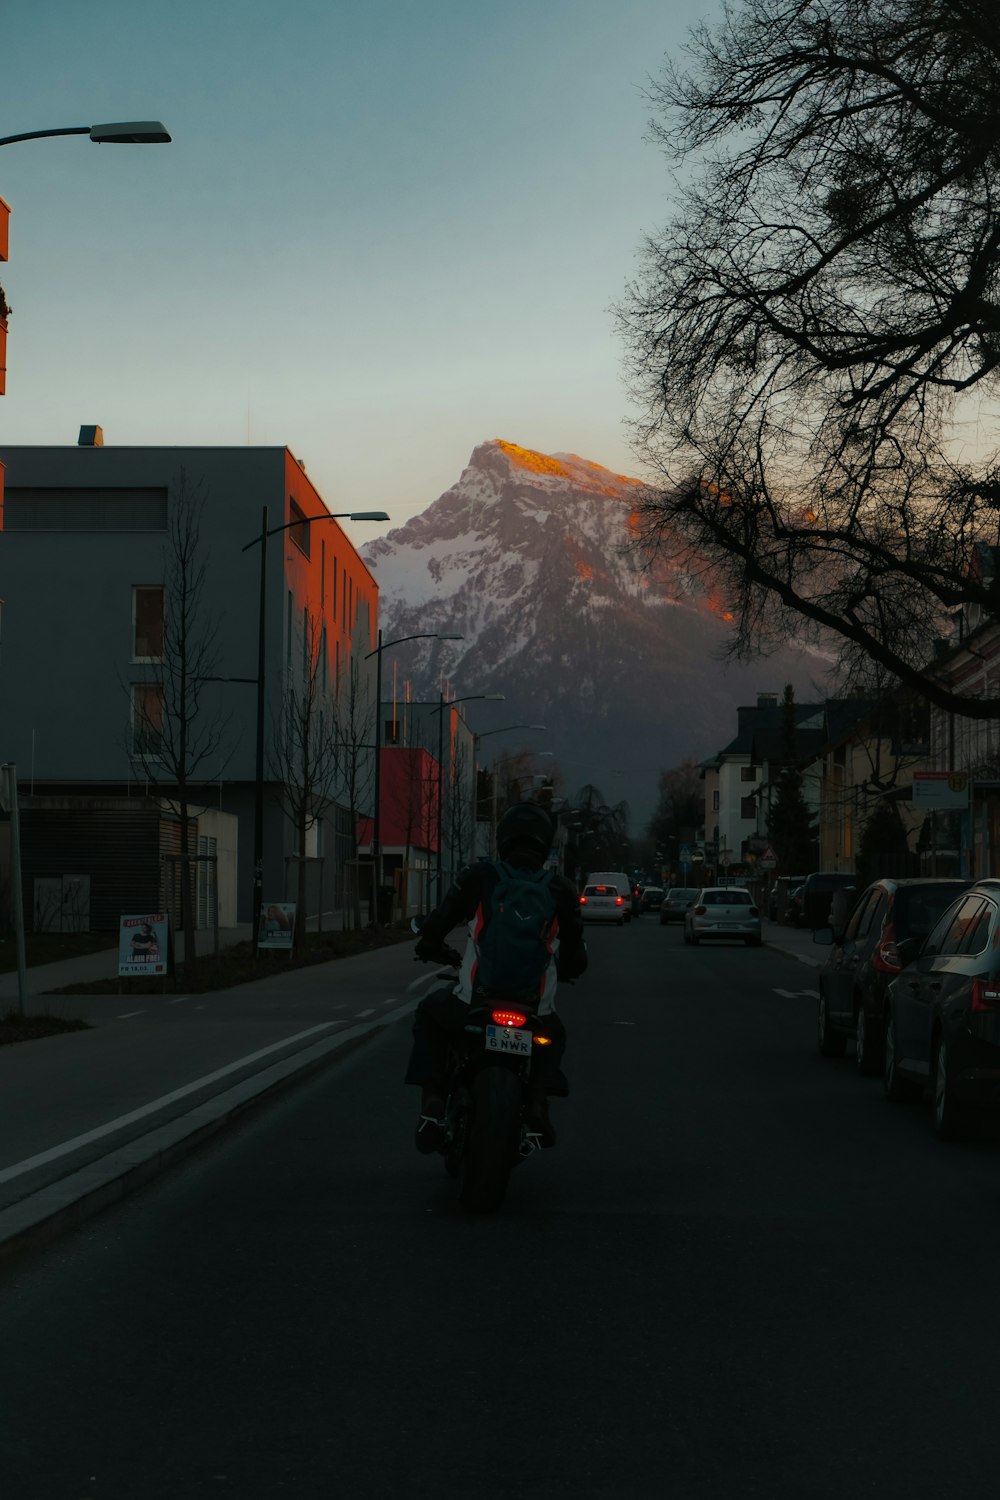 a person riding a motorcycle on a street with a mountain in the background